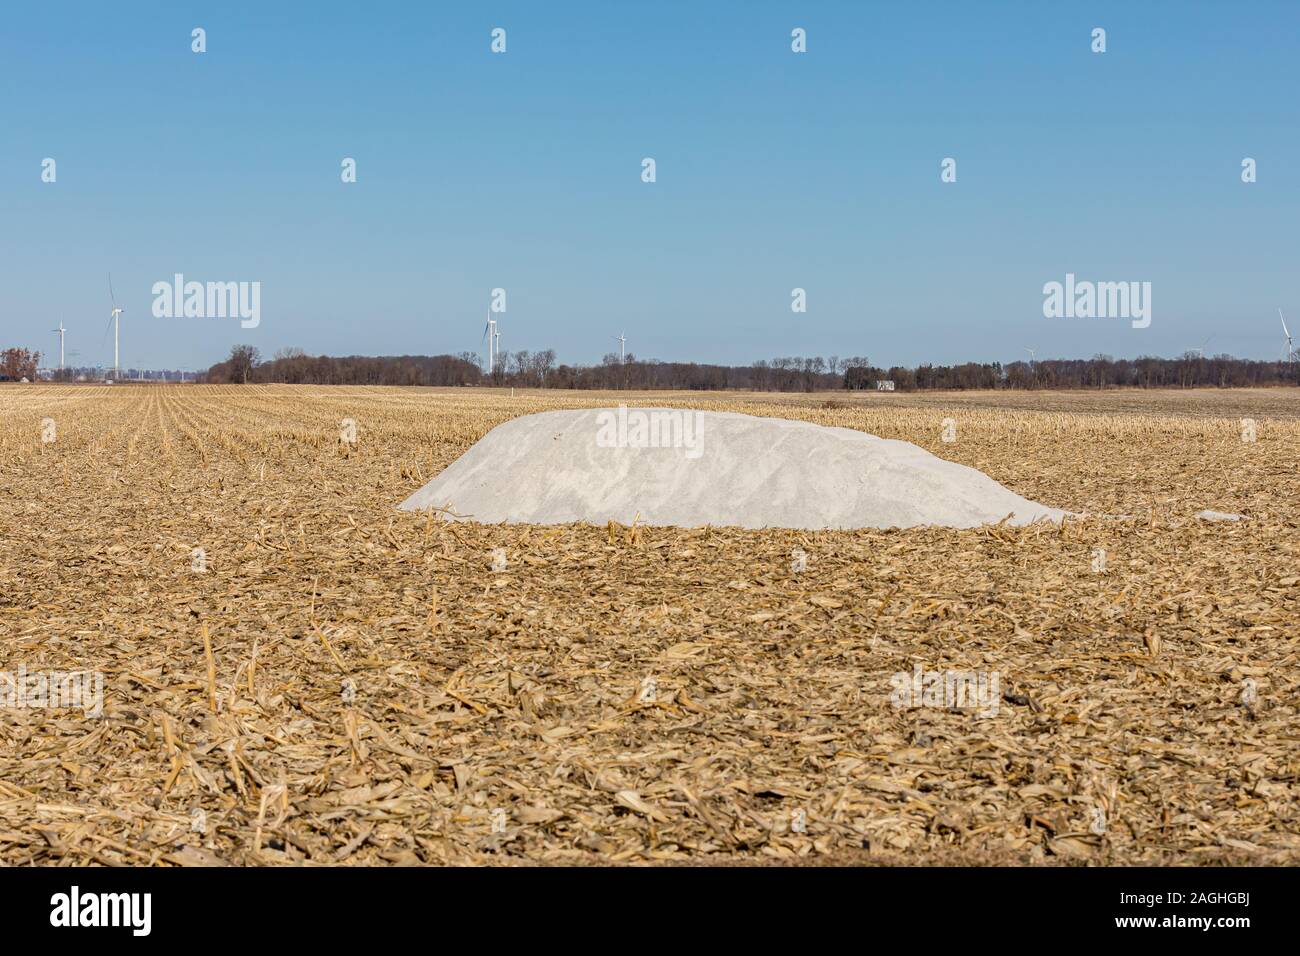 Pile of pulverized agricultural slaked lime in harvested cornfield with cornstalks, waiting for fall fertilizer application Stock Photo